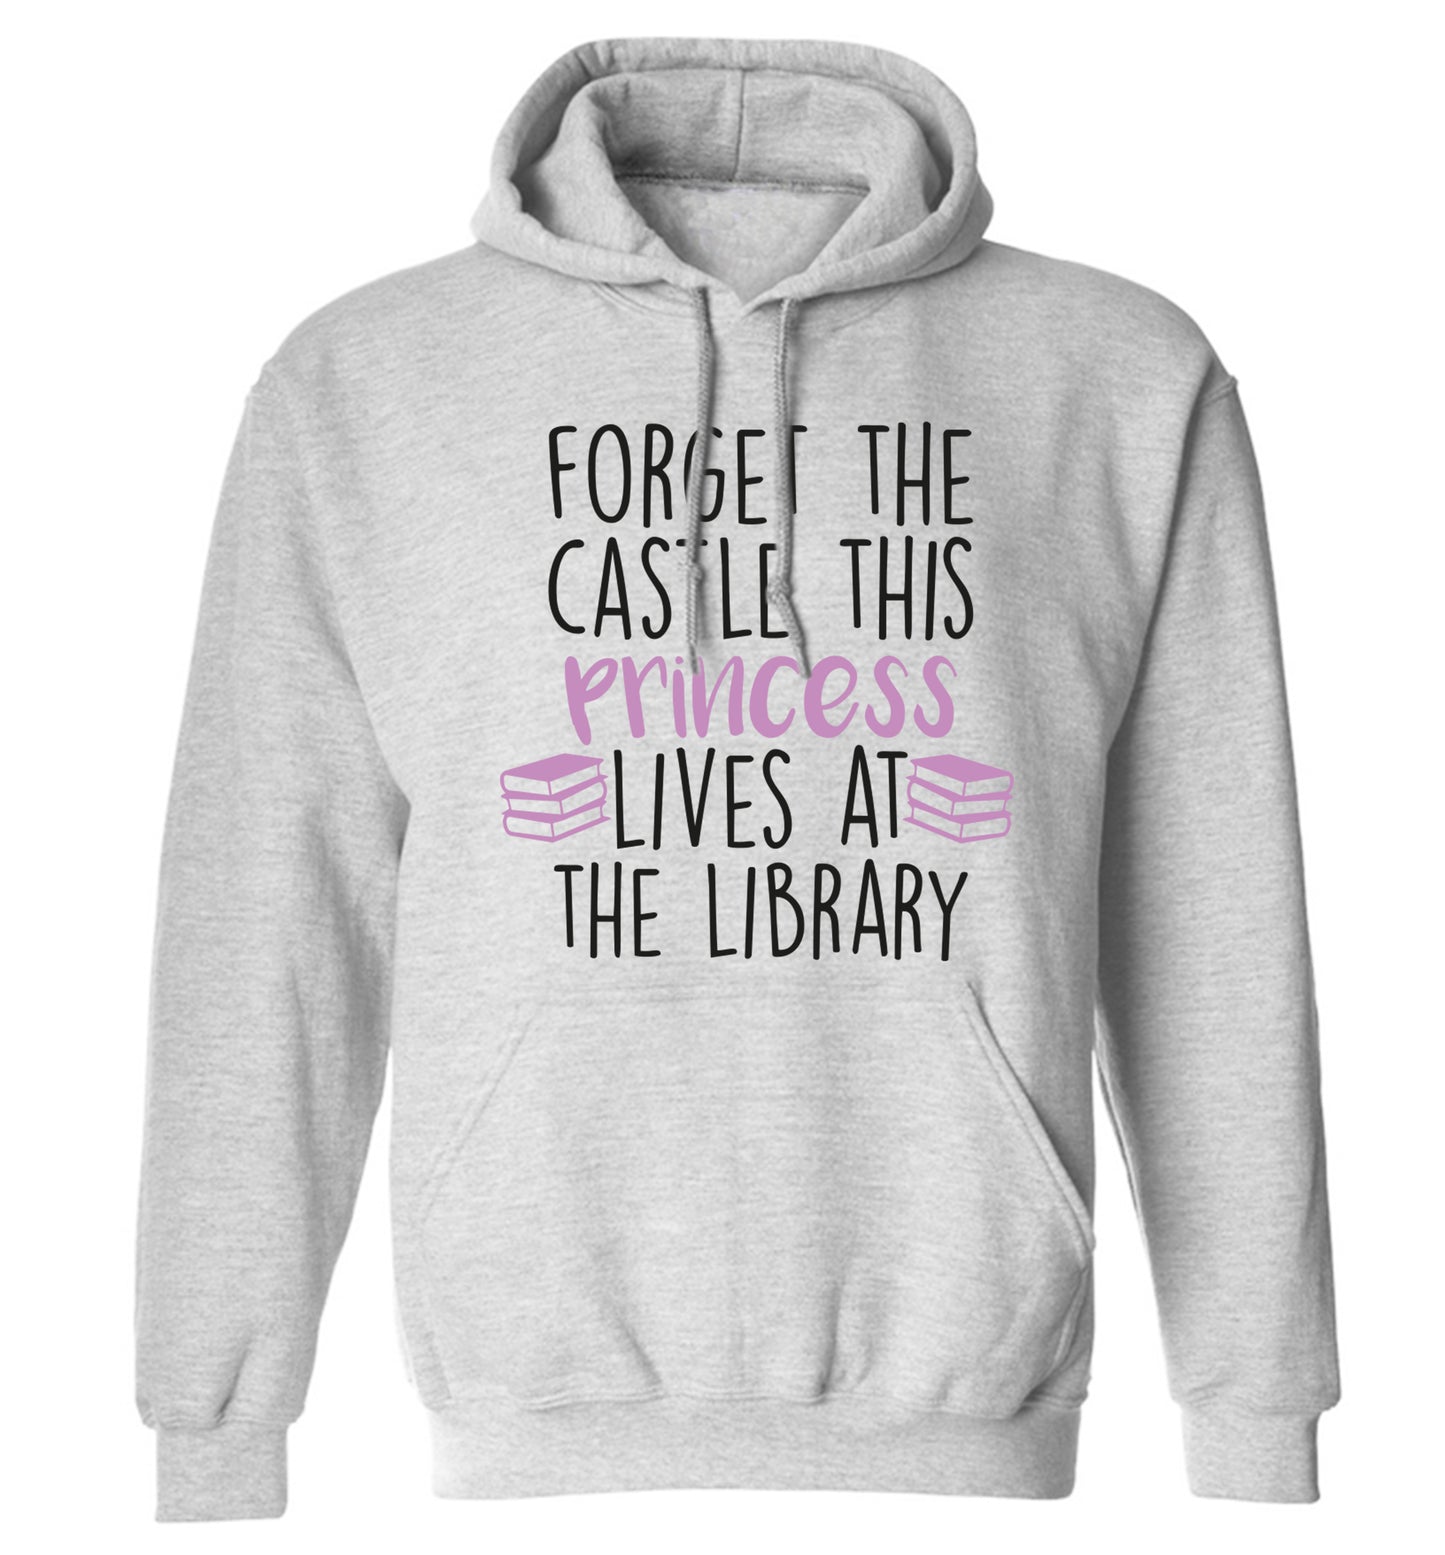 Forget the castle this princess lives at the library adults unisex grey hoodie 2XL